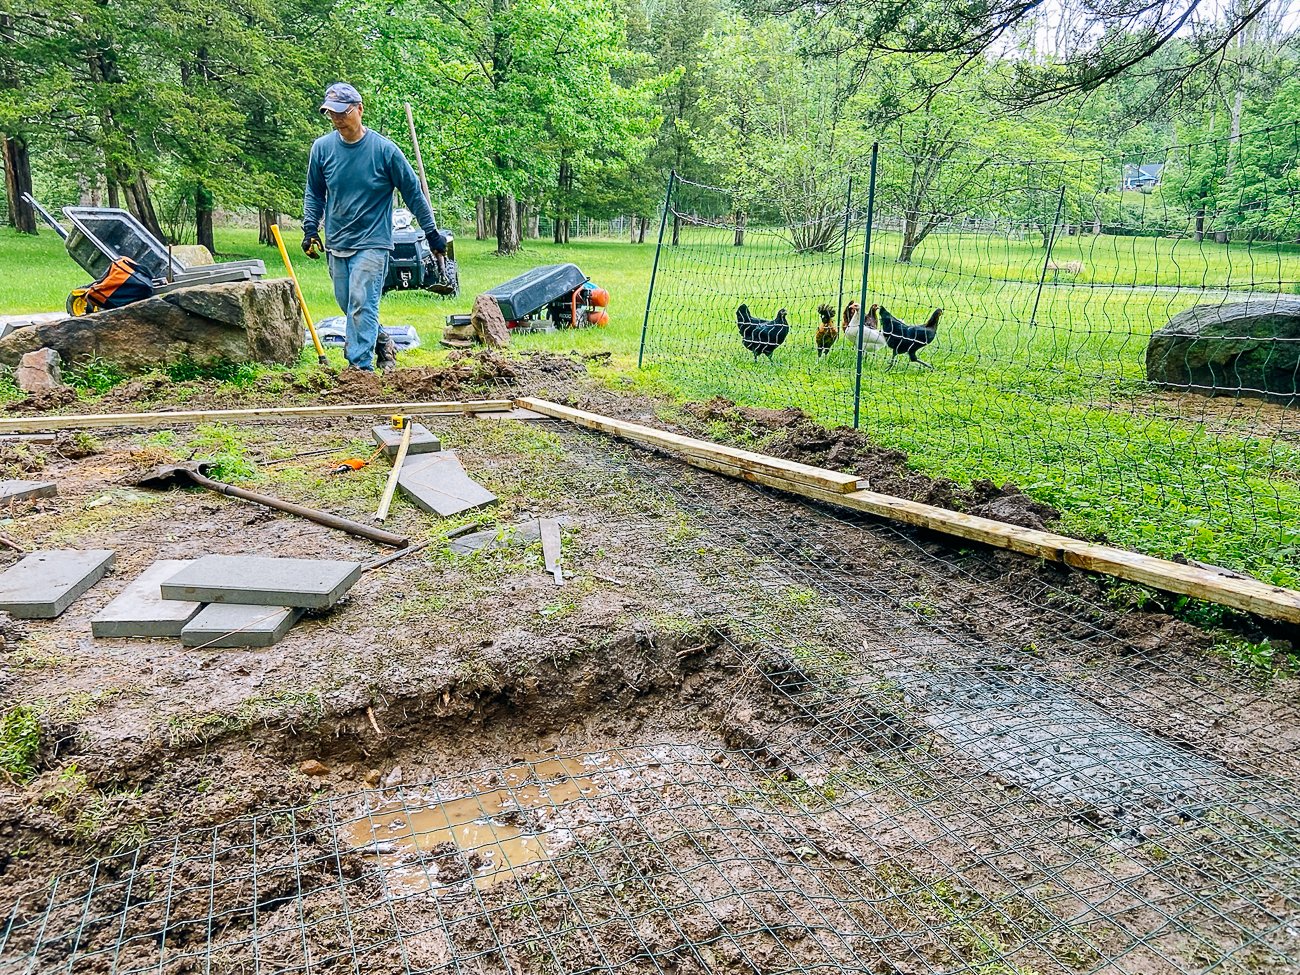 Bill working on foundation for new duck run